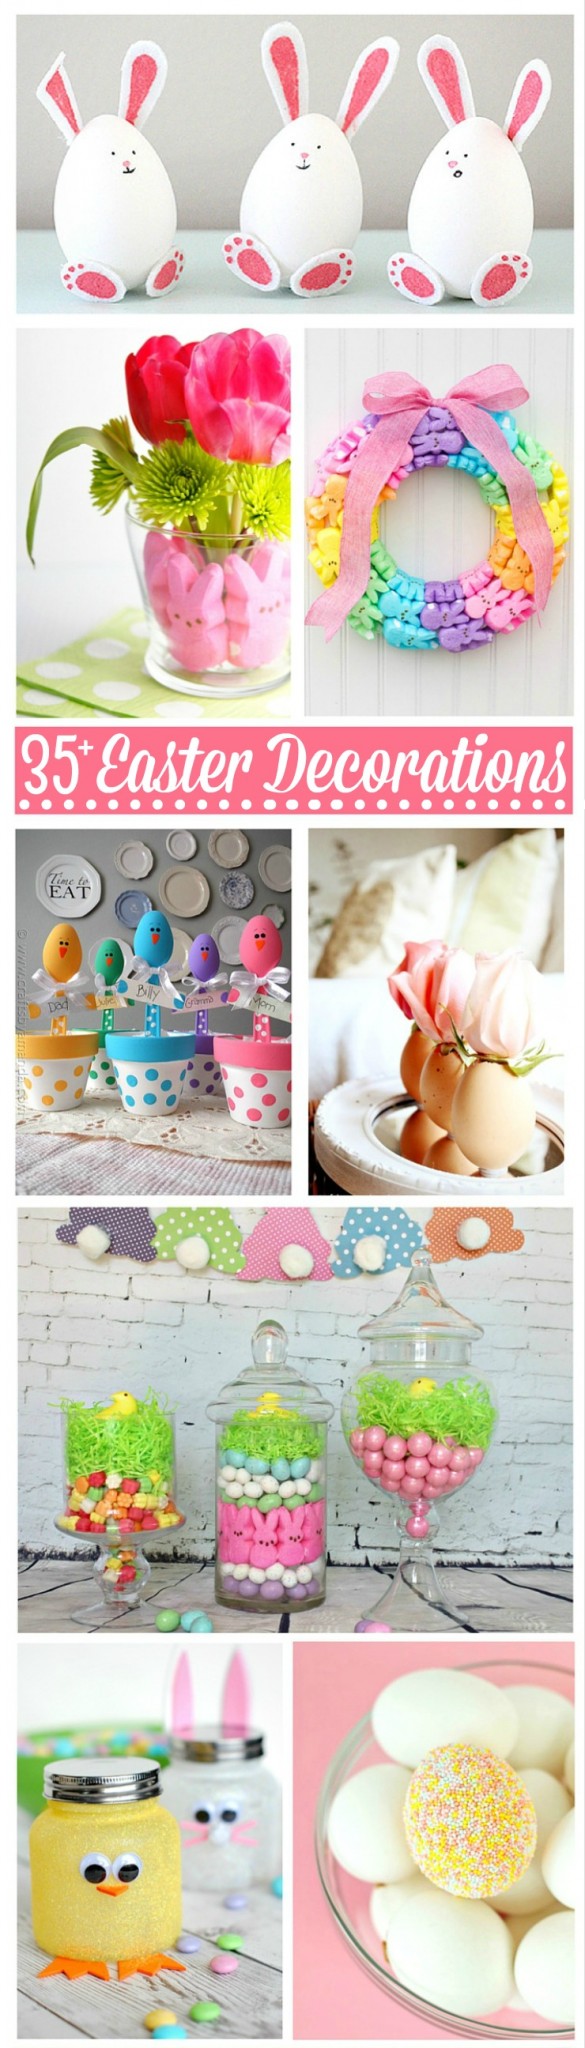 Check out these 35+ Gorgeous Easter Decorations to help you get inspired to get your home Easter ready in style! Great DIY Easter Decor ideas!